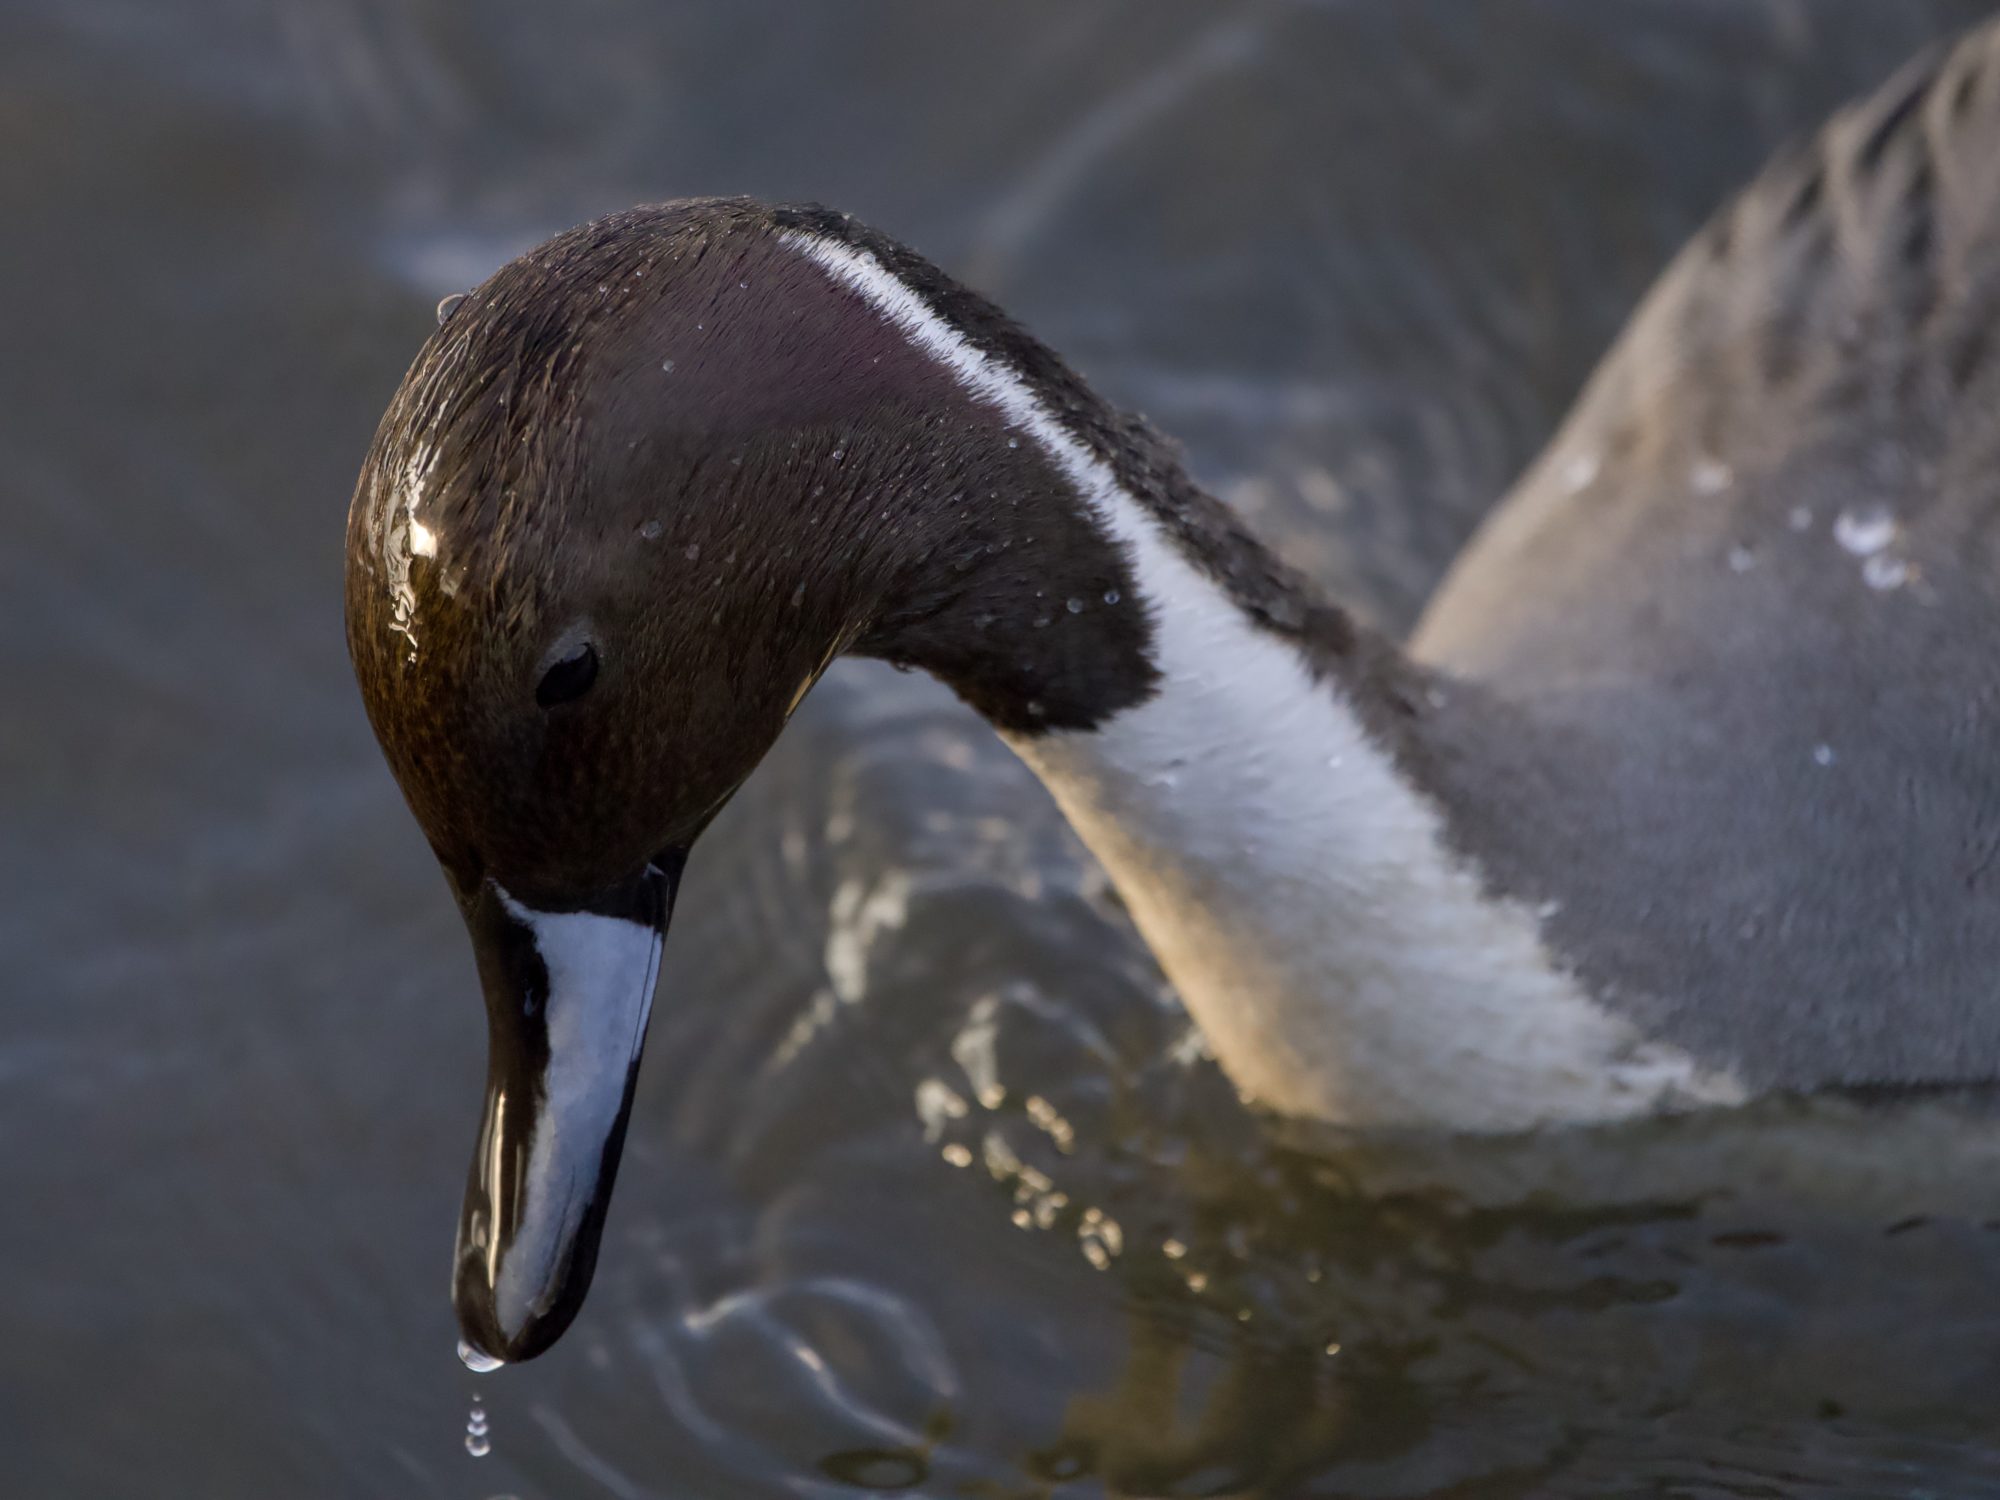 A slightly out of focus photo of a male Northern Pintail in the water